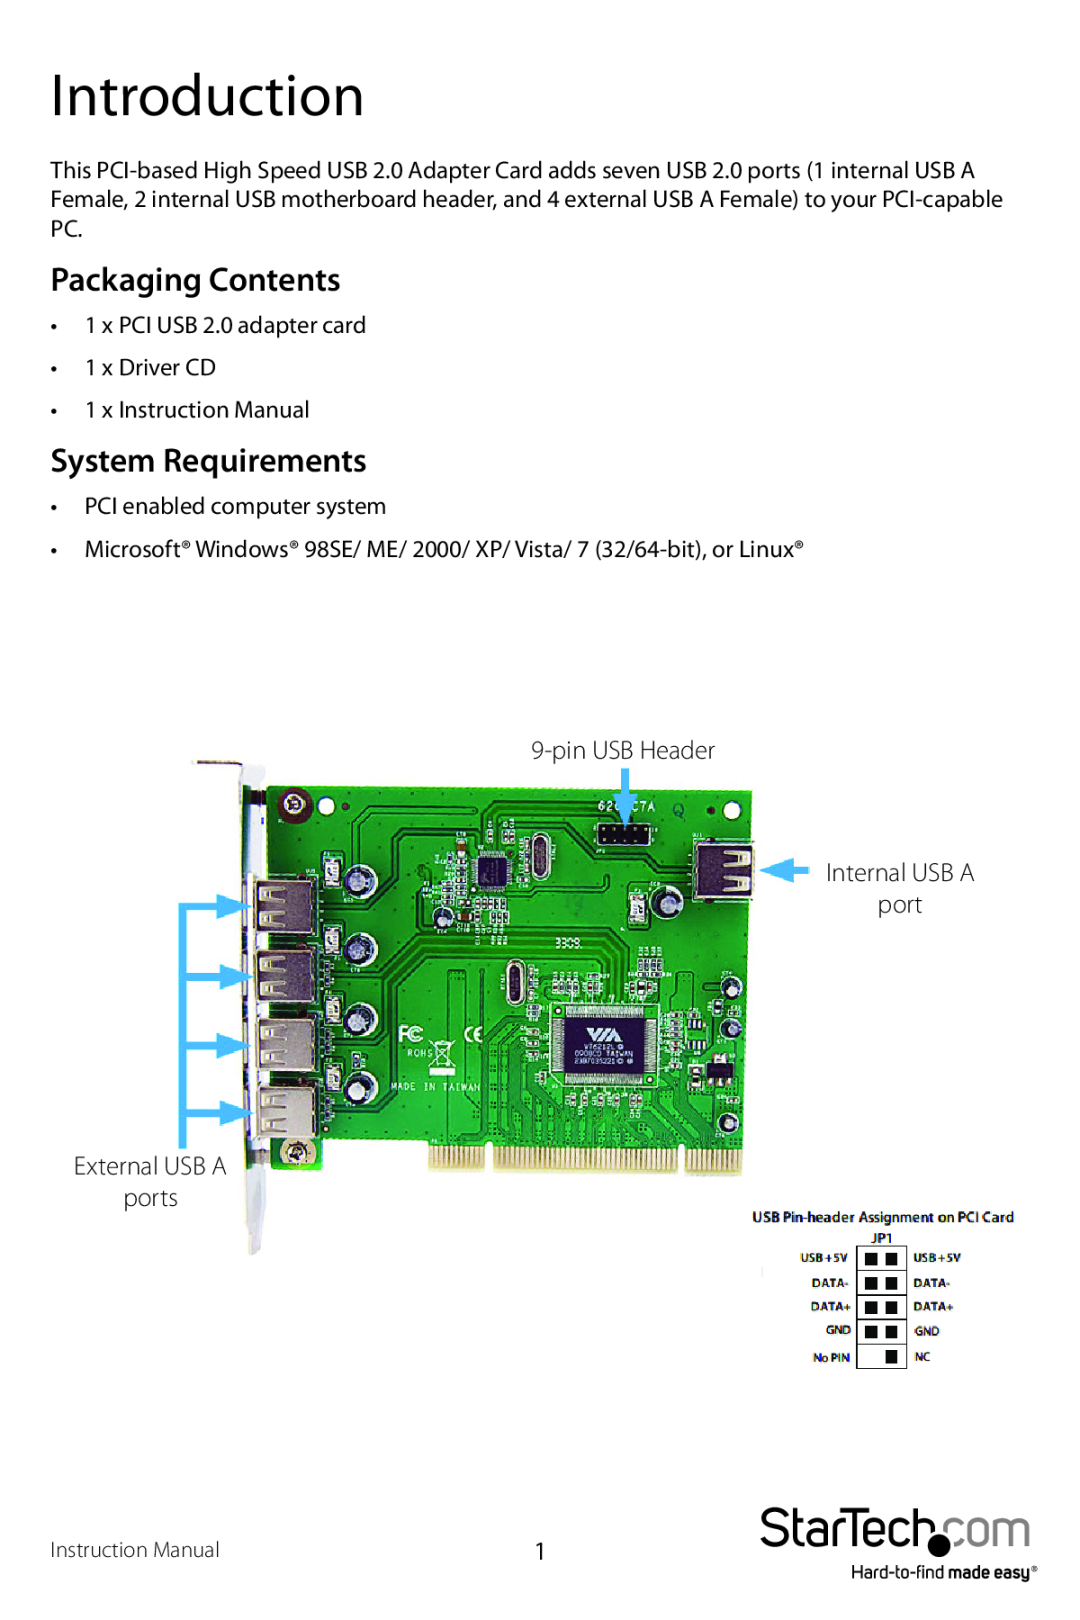 StarTech.com pciusb7 manual Introduction, Packaging Contents, System Requirements 